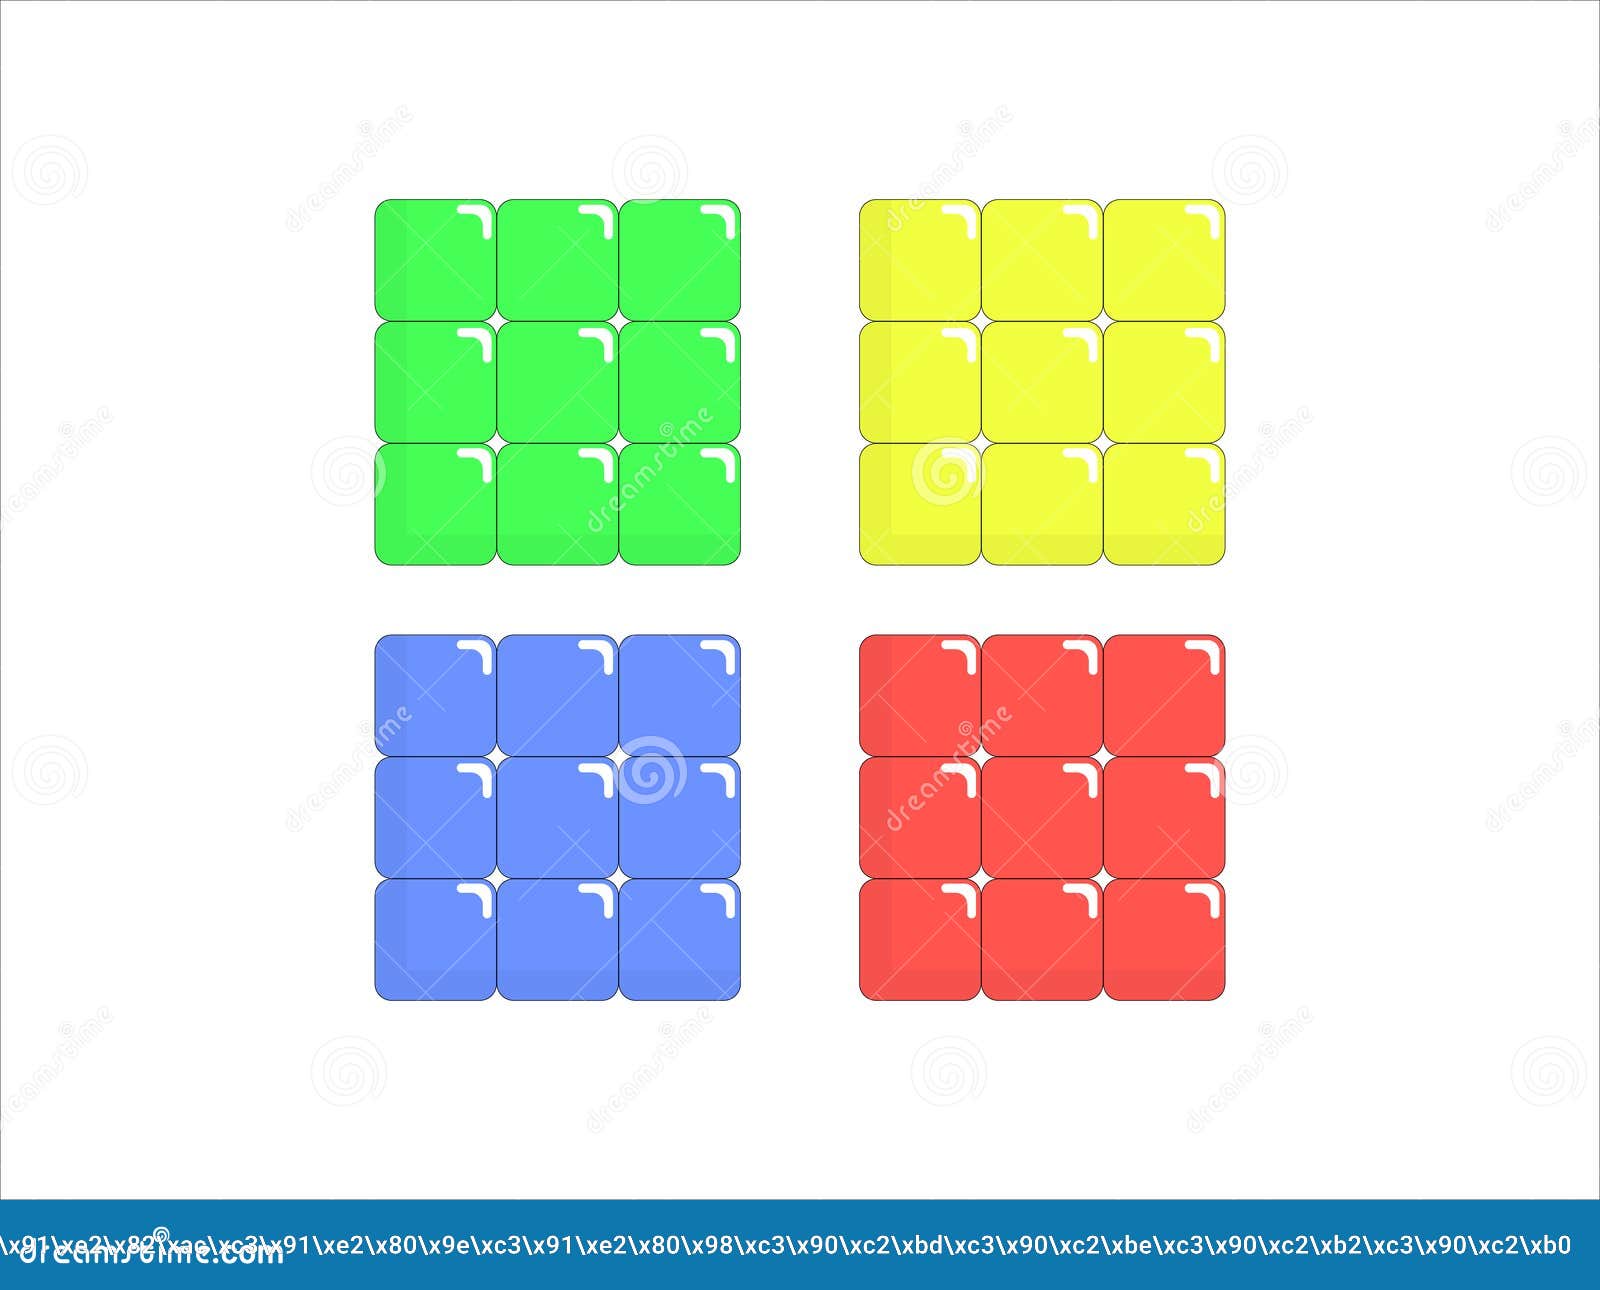 abstraction of s from squares of different colors on a white background.